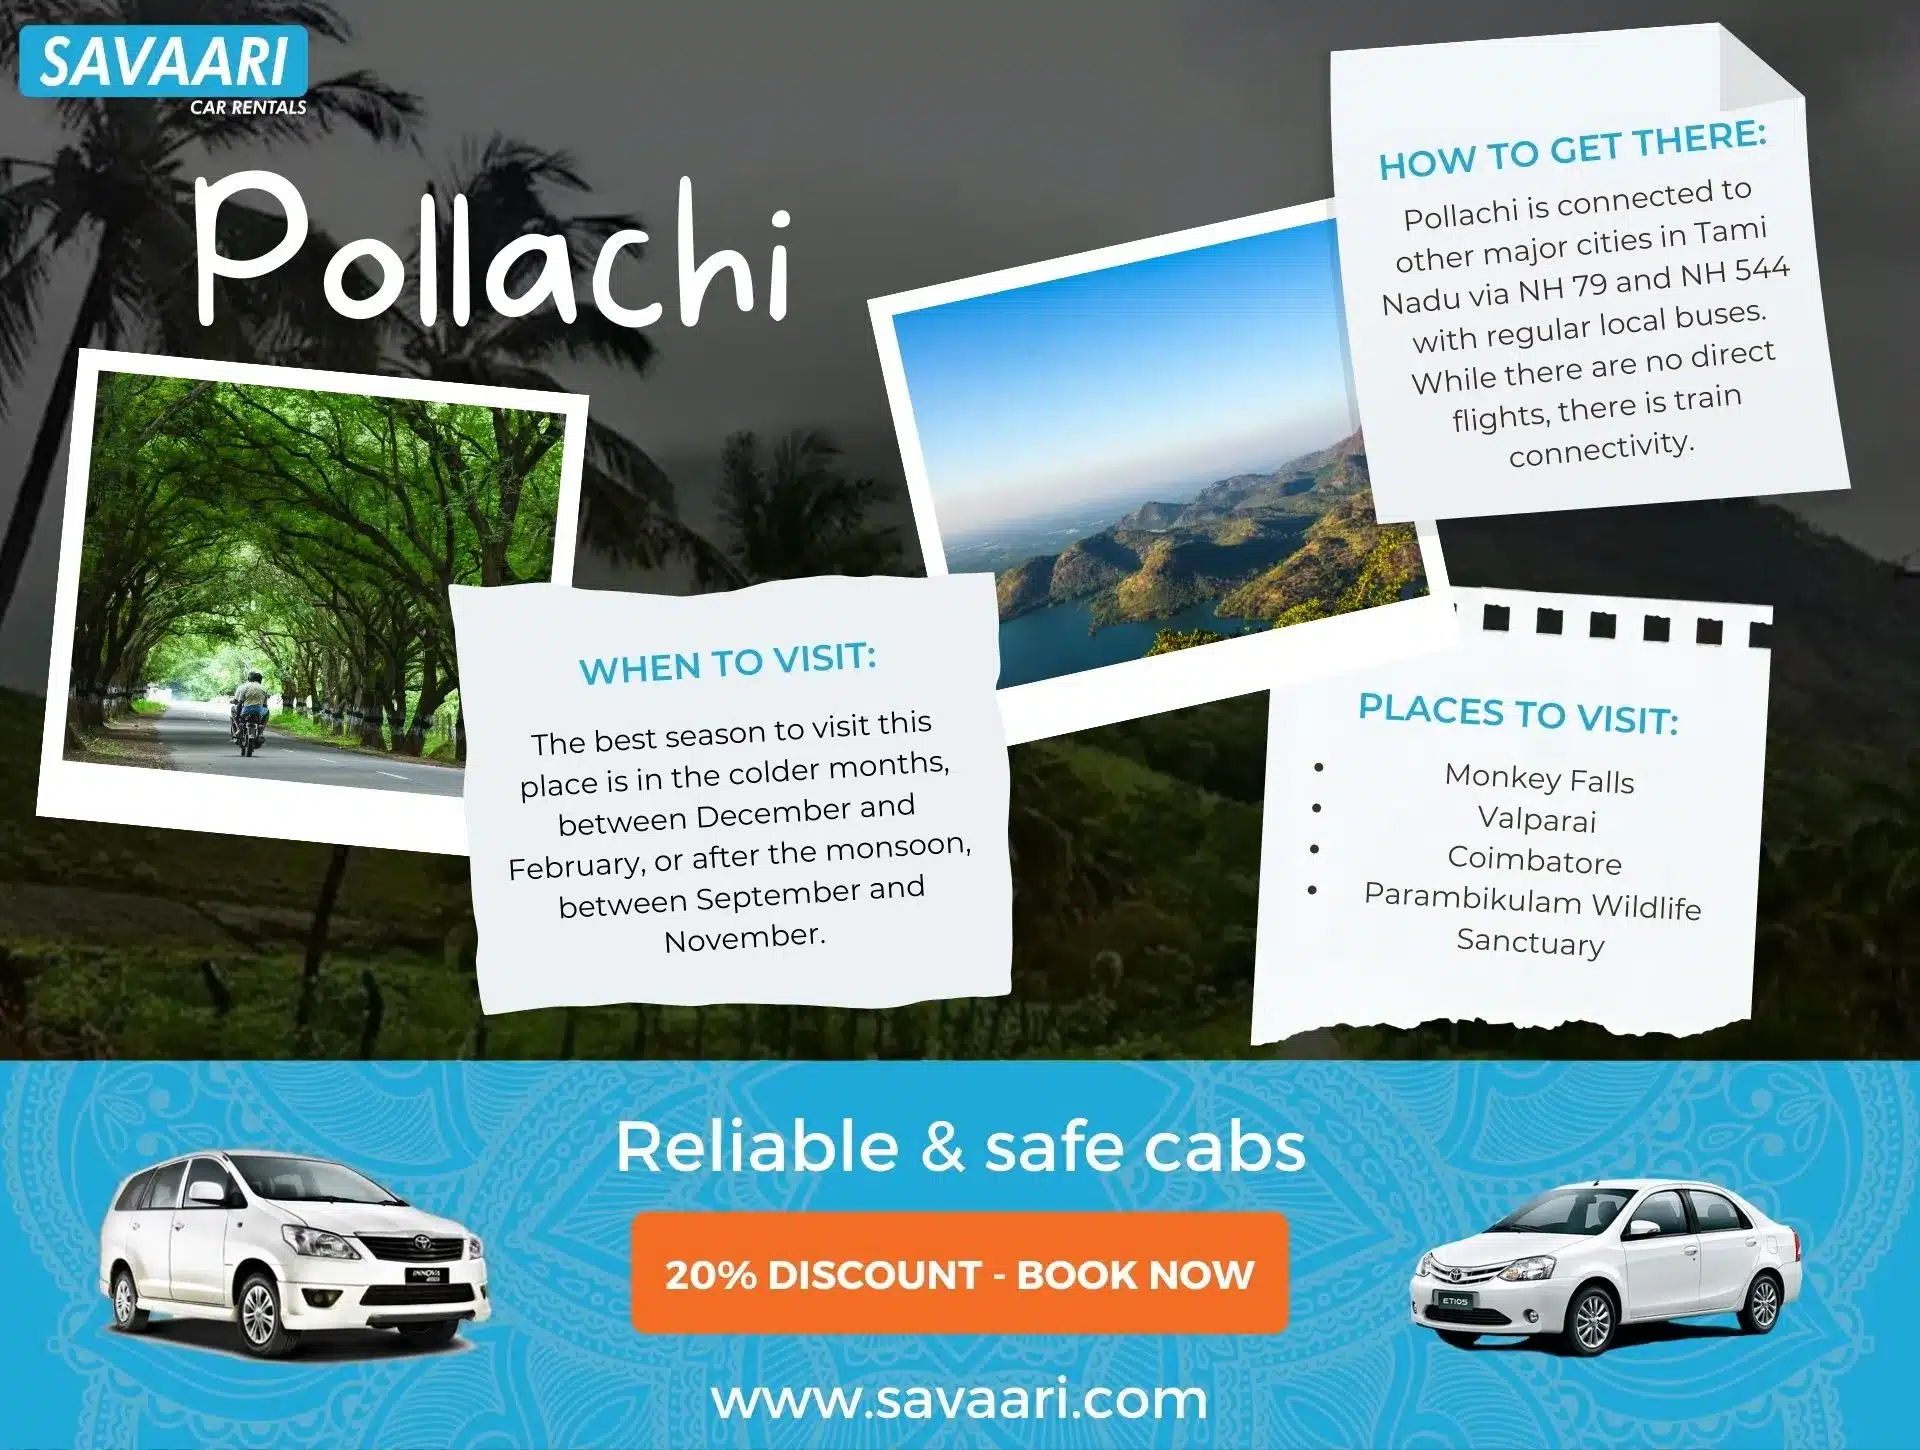 Things to do in Pollachi